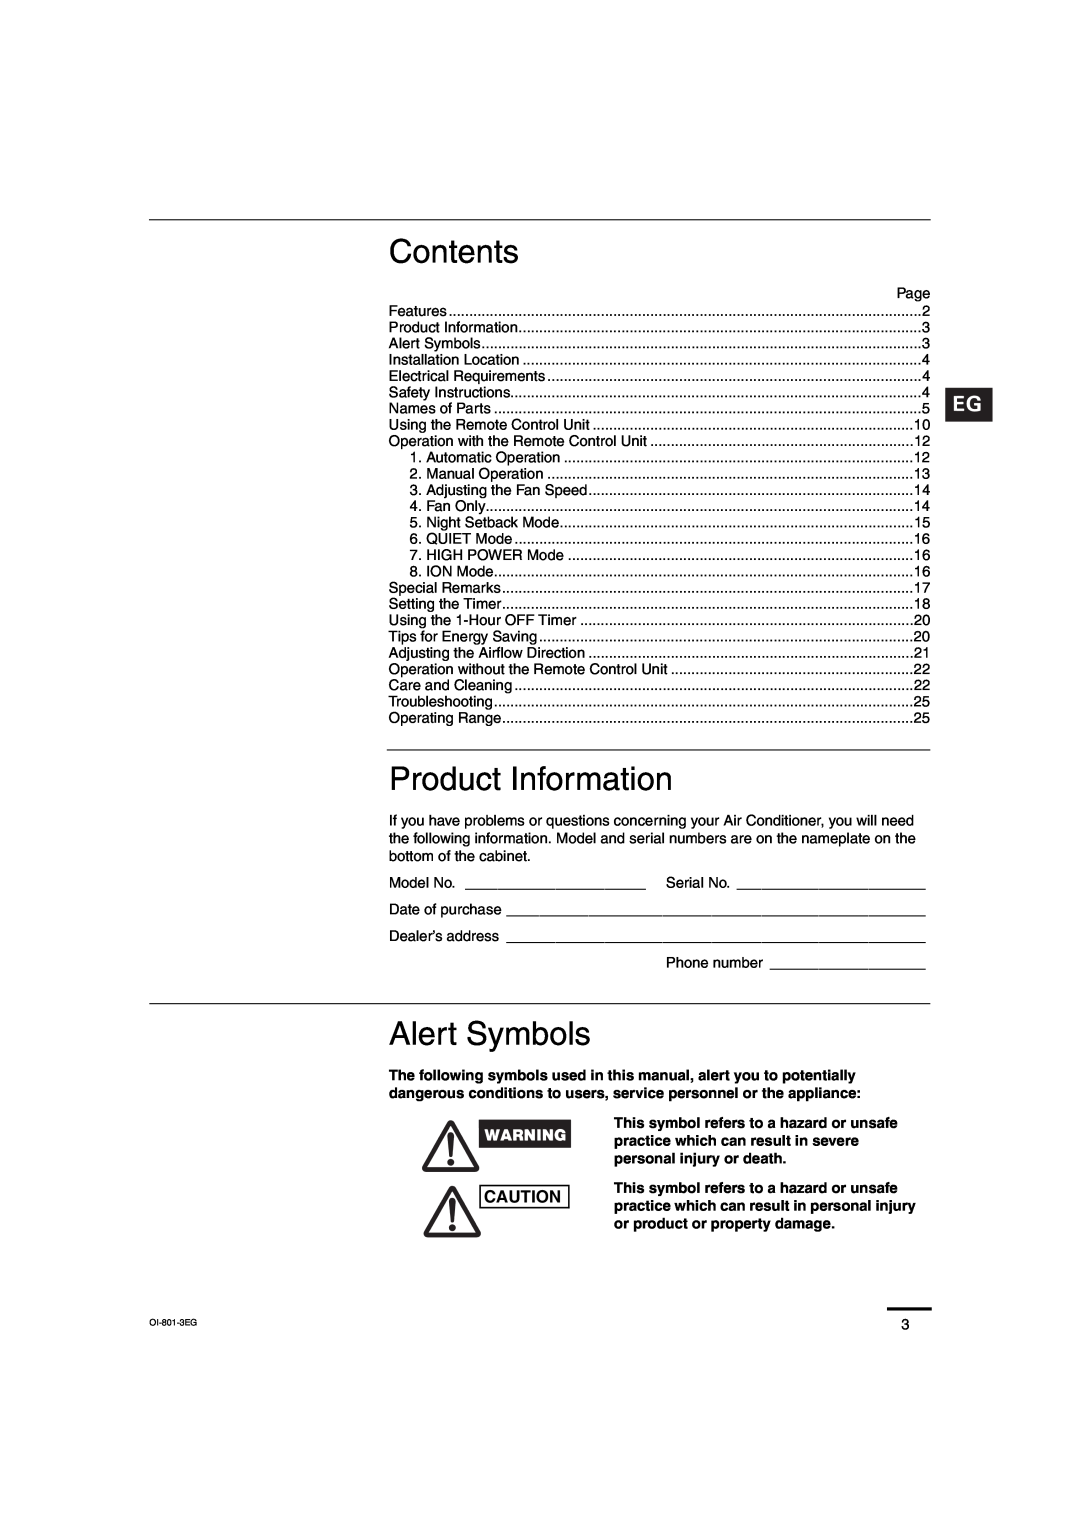 Sanyo CH1872, CH2472 service manual Contents, Product Information, Alert Symbols 